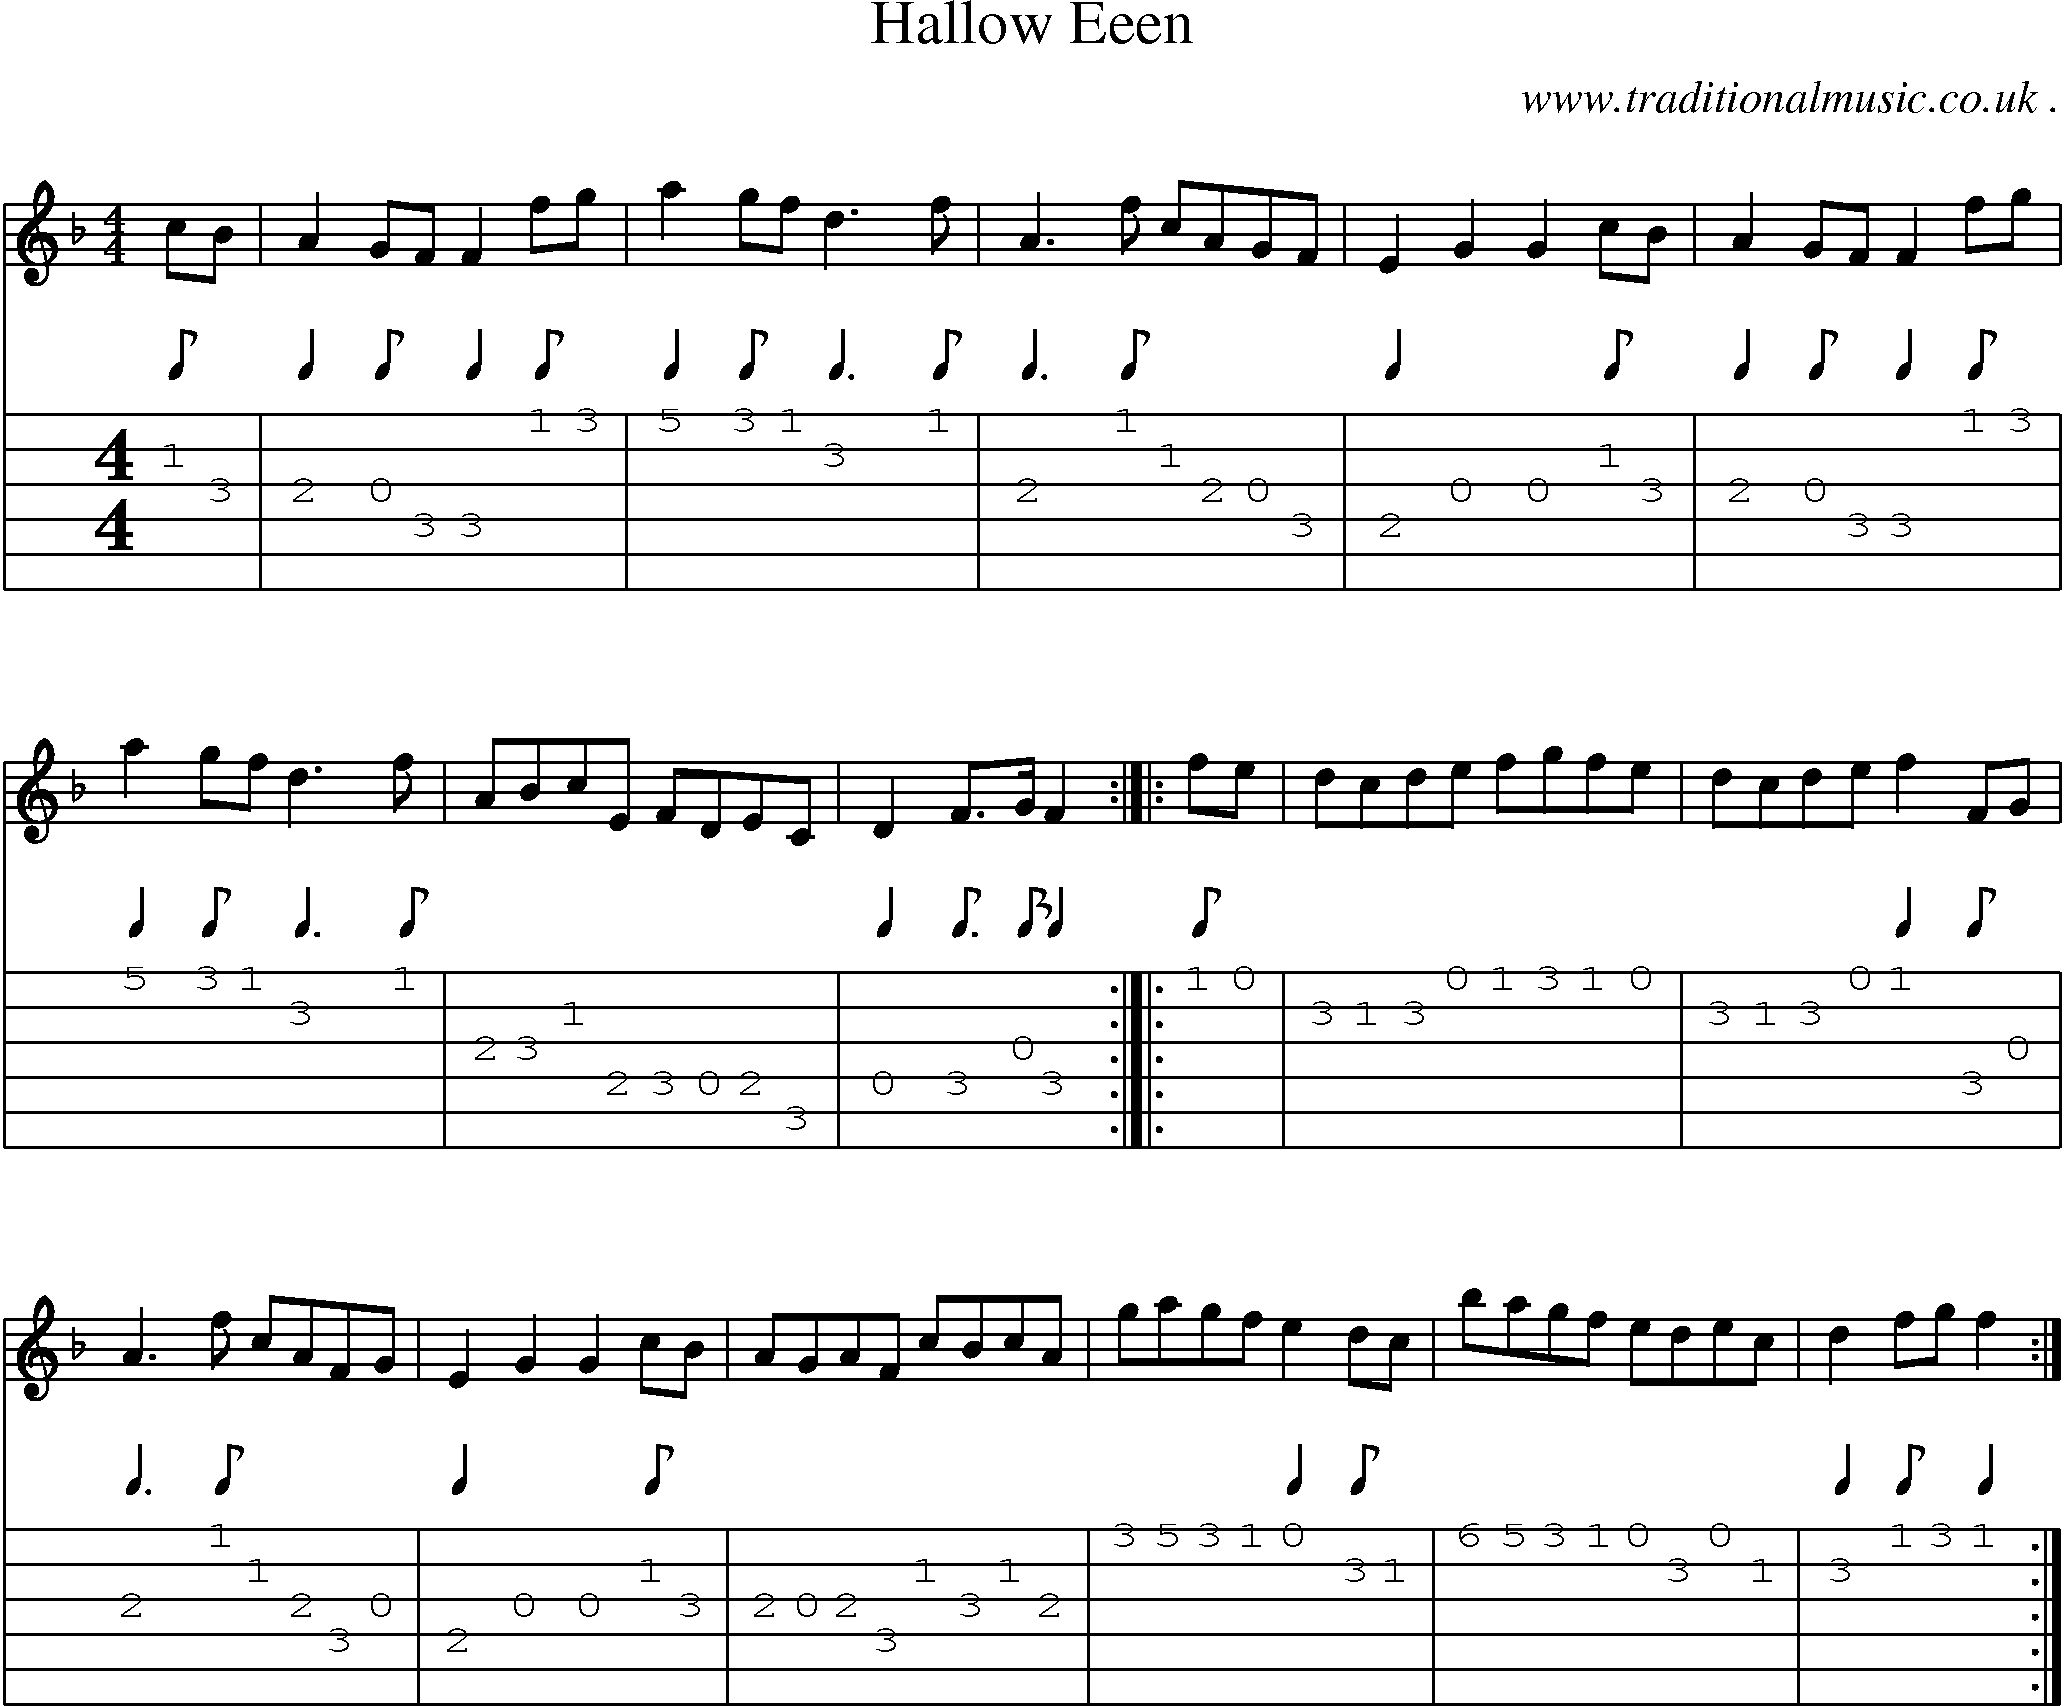 Sheet-music  score, Chords and Guitar Tabs for Hallow Eeen 